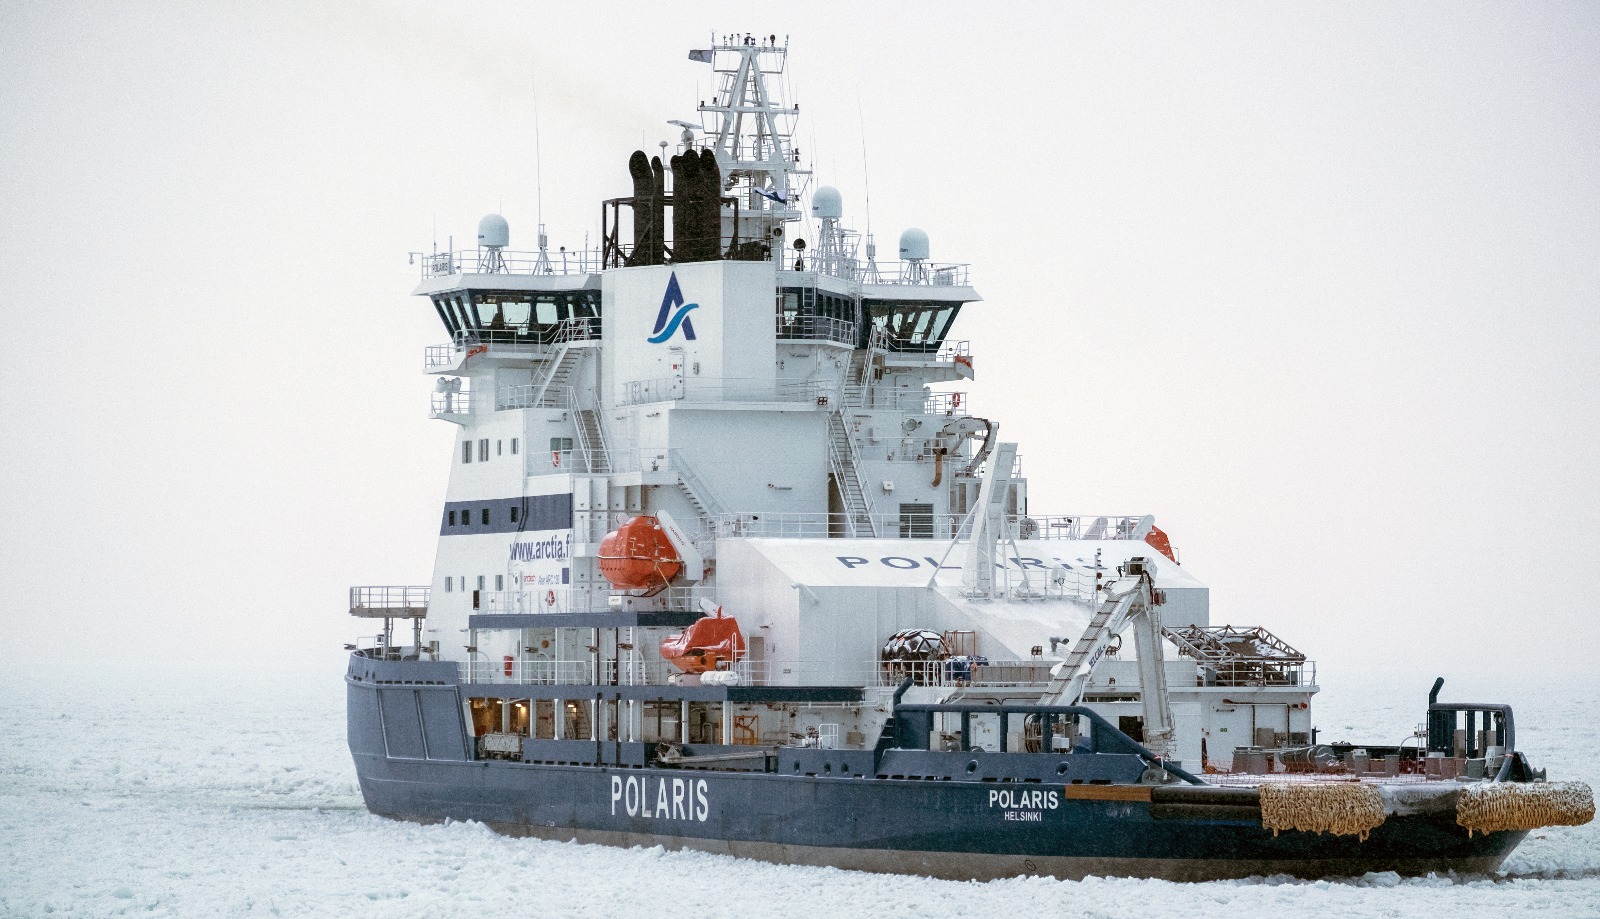 Icebreaker Polaris as seen from the Otso, in the northern Gulf of Bothnia